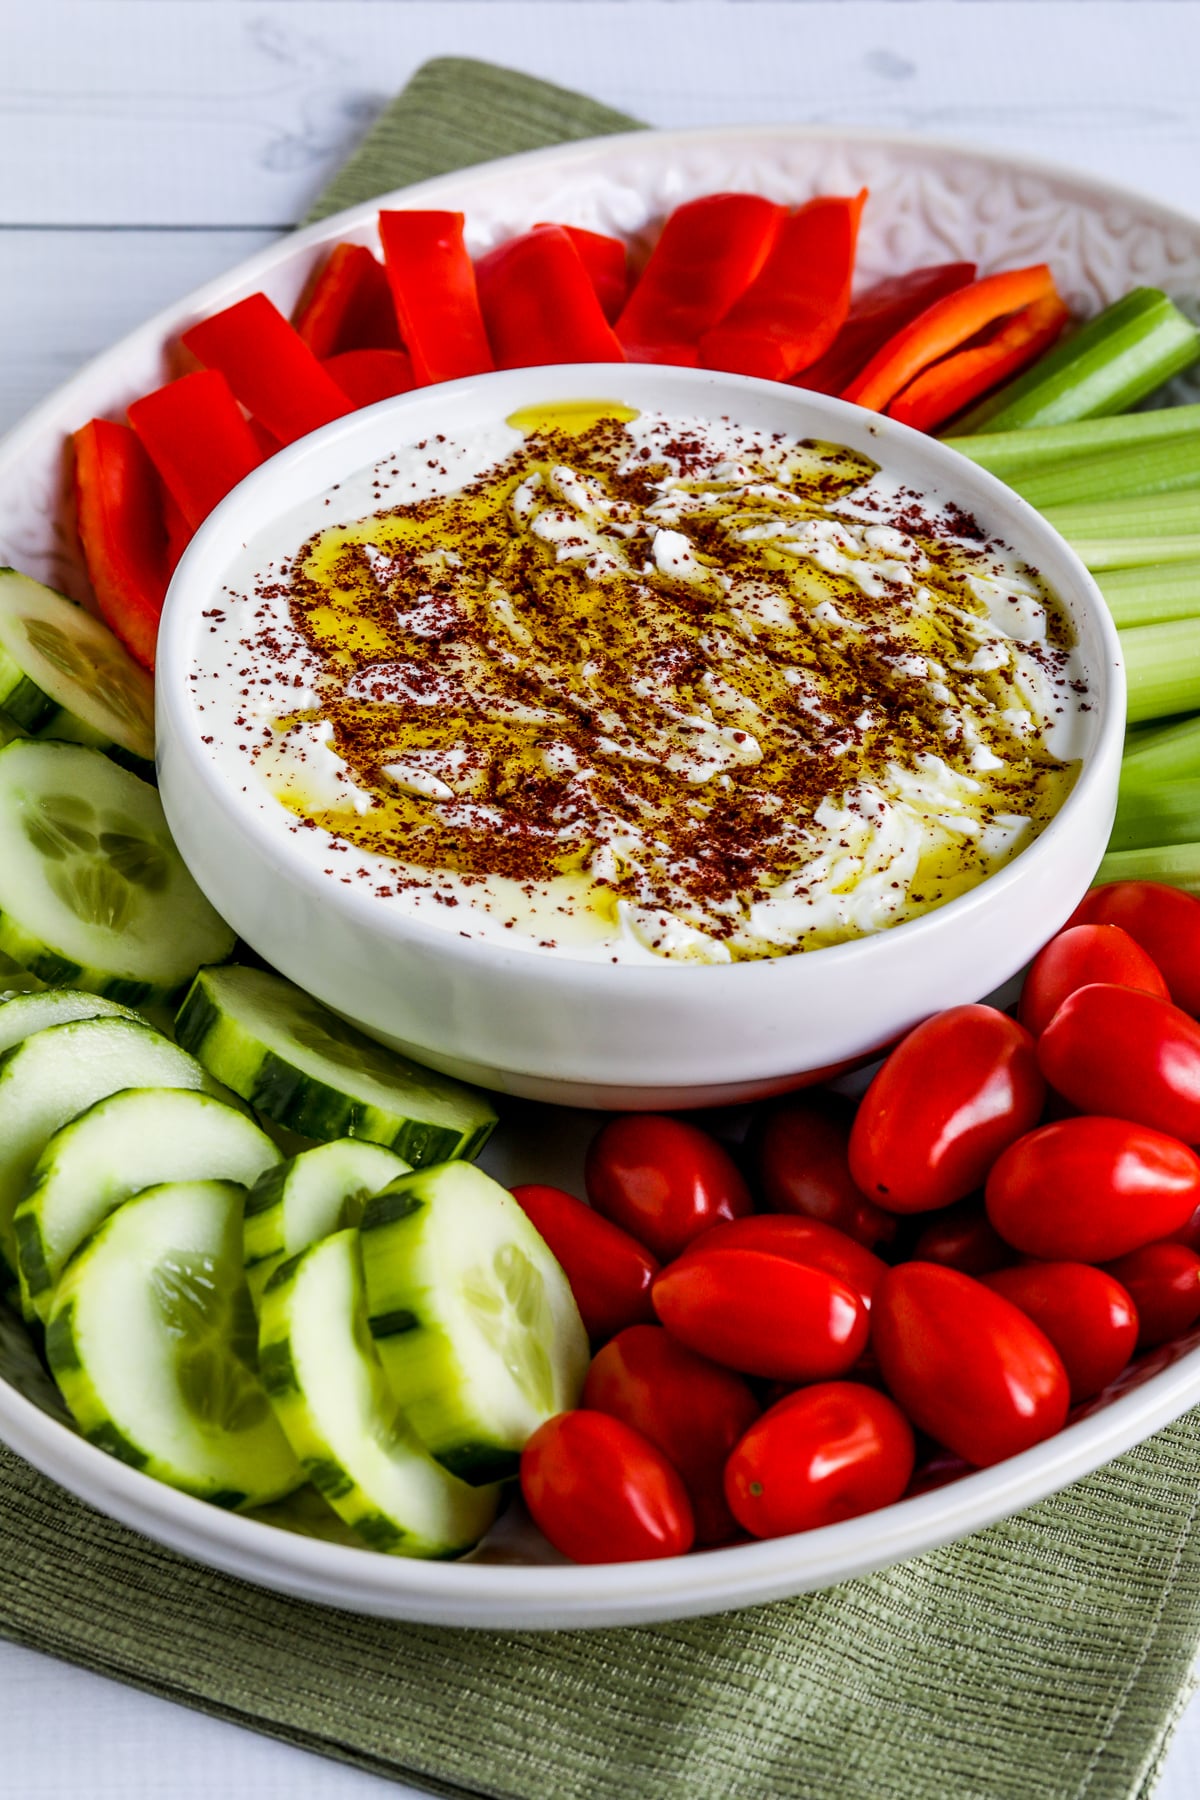 Whipped Feta Dip with Sumac shown on serving plate with tomatoes, cucumber, celery, and red pepper strips